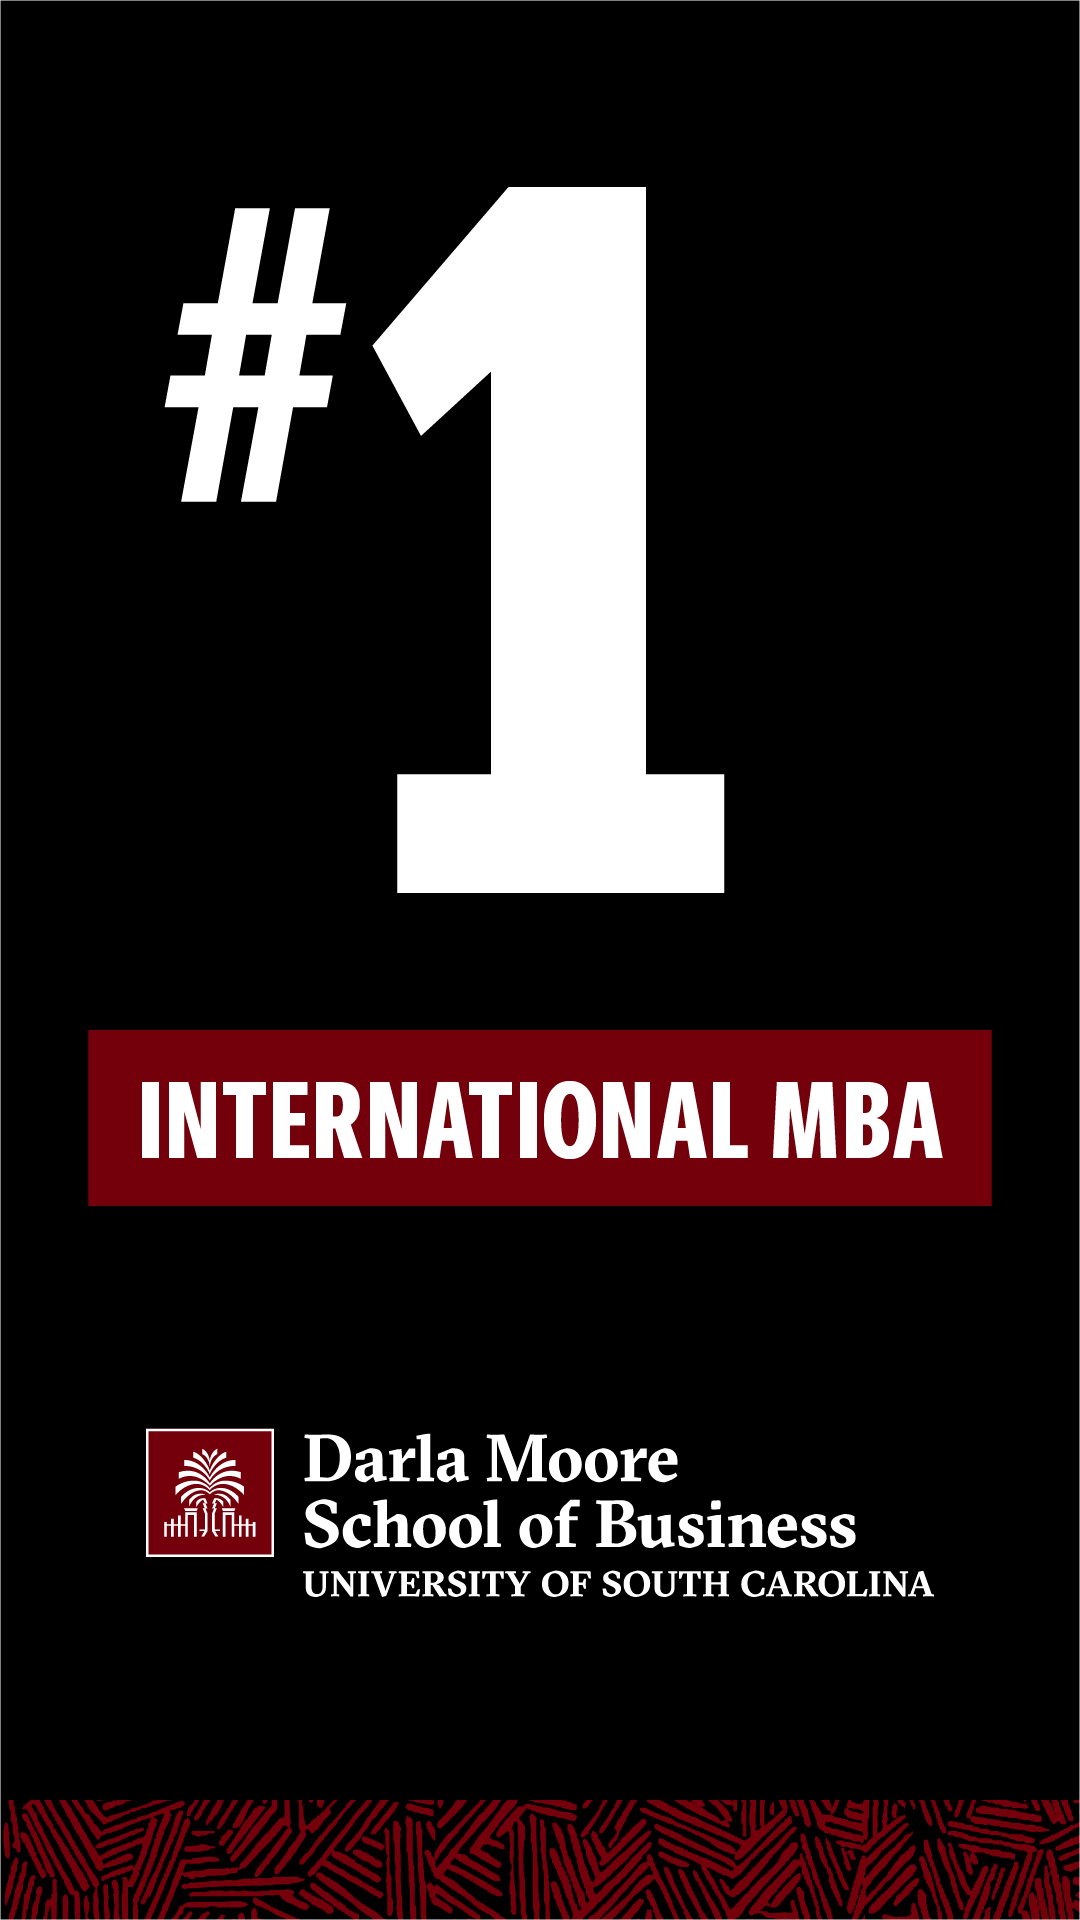 Our IMBA program has been ranked no. 1 for 11 consecutive years by US News and World Report